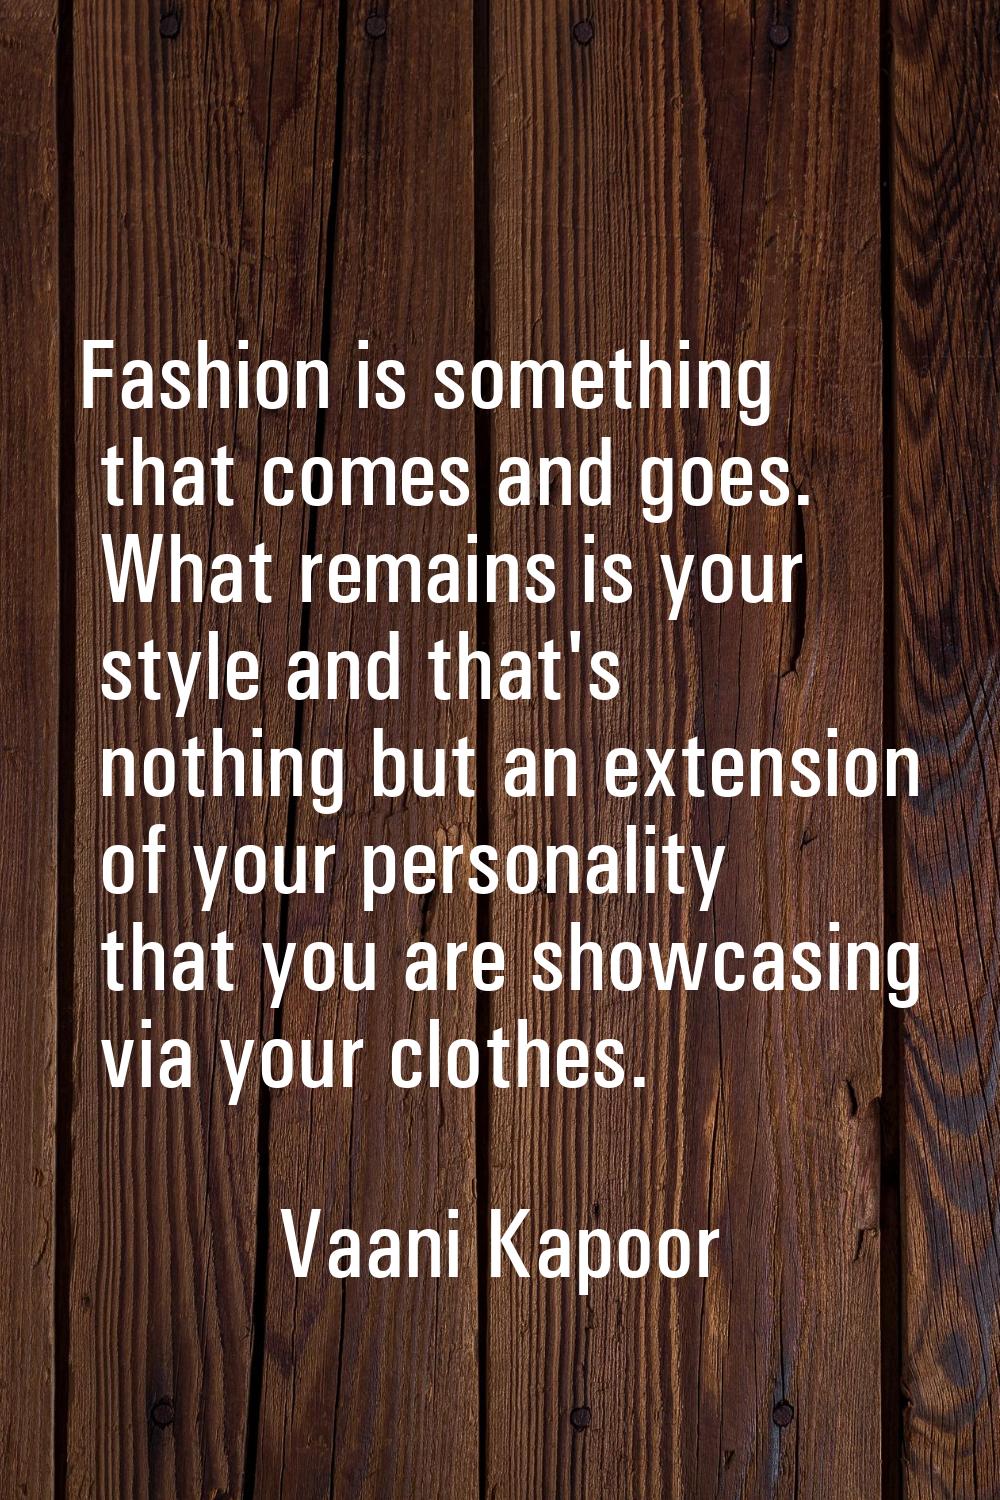 Fashion is something that comes and goes. What remains is your style and that's nothing but an exte